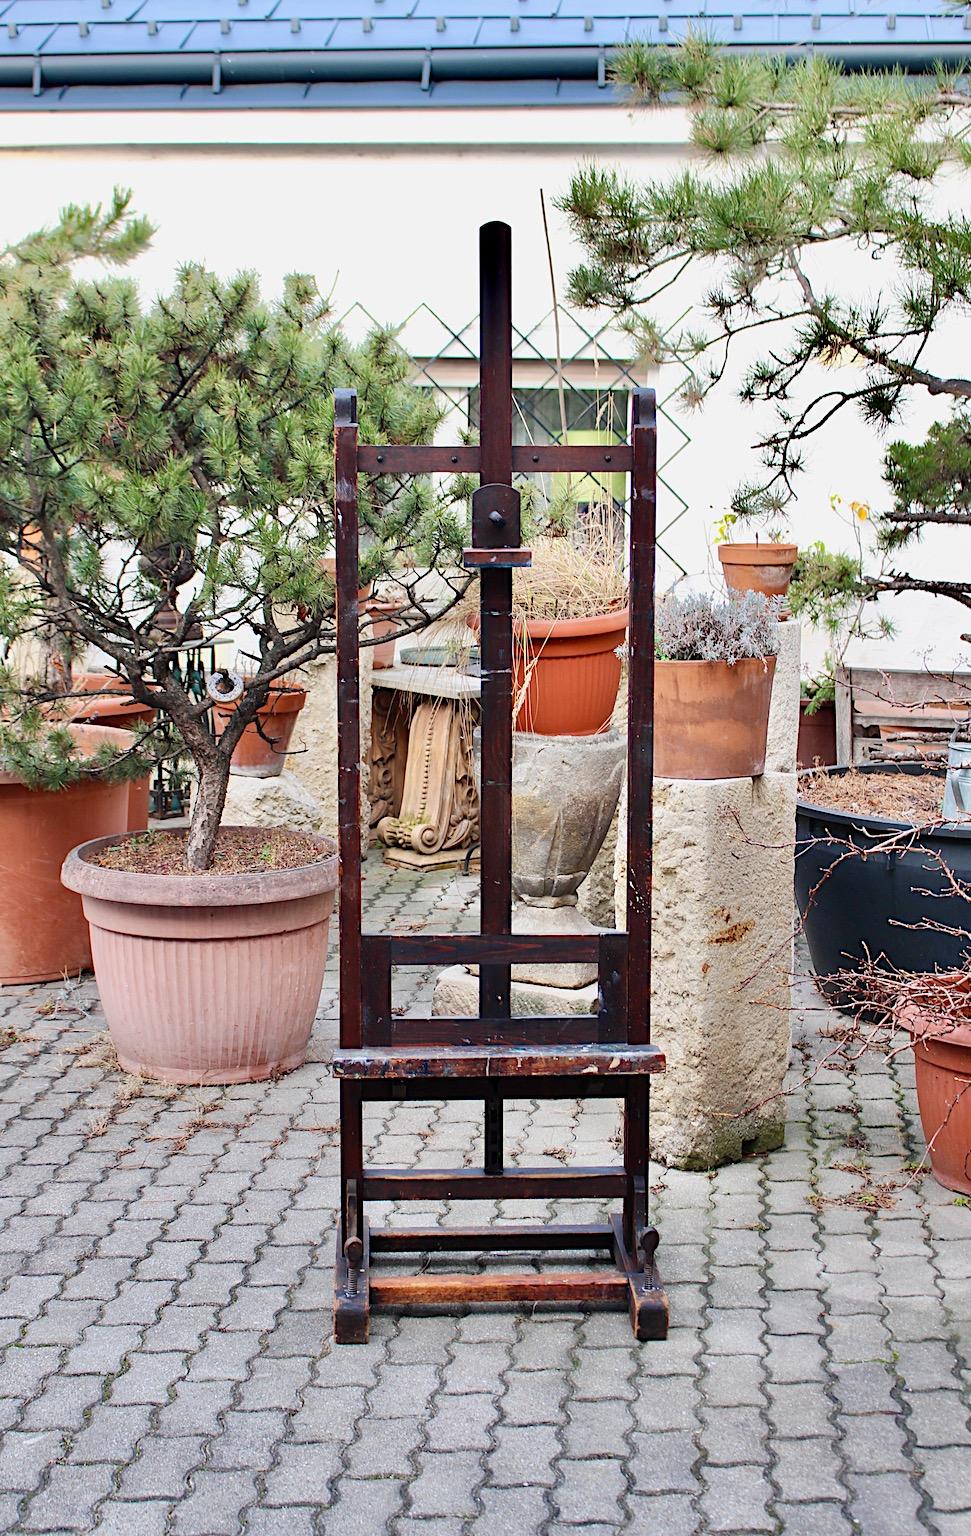 Mid Century Modern vintage easel from spruce and metal, Austria 1950s.
Beautiful easel with adjustable height from 184 cm to 270 cm from spruce, metal and brass details in brown color tone.
Good condition with signs of age and use like nice color